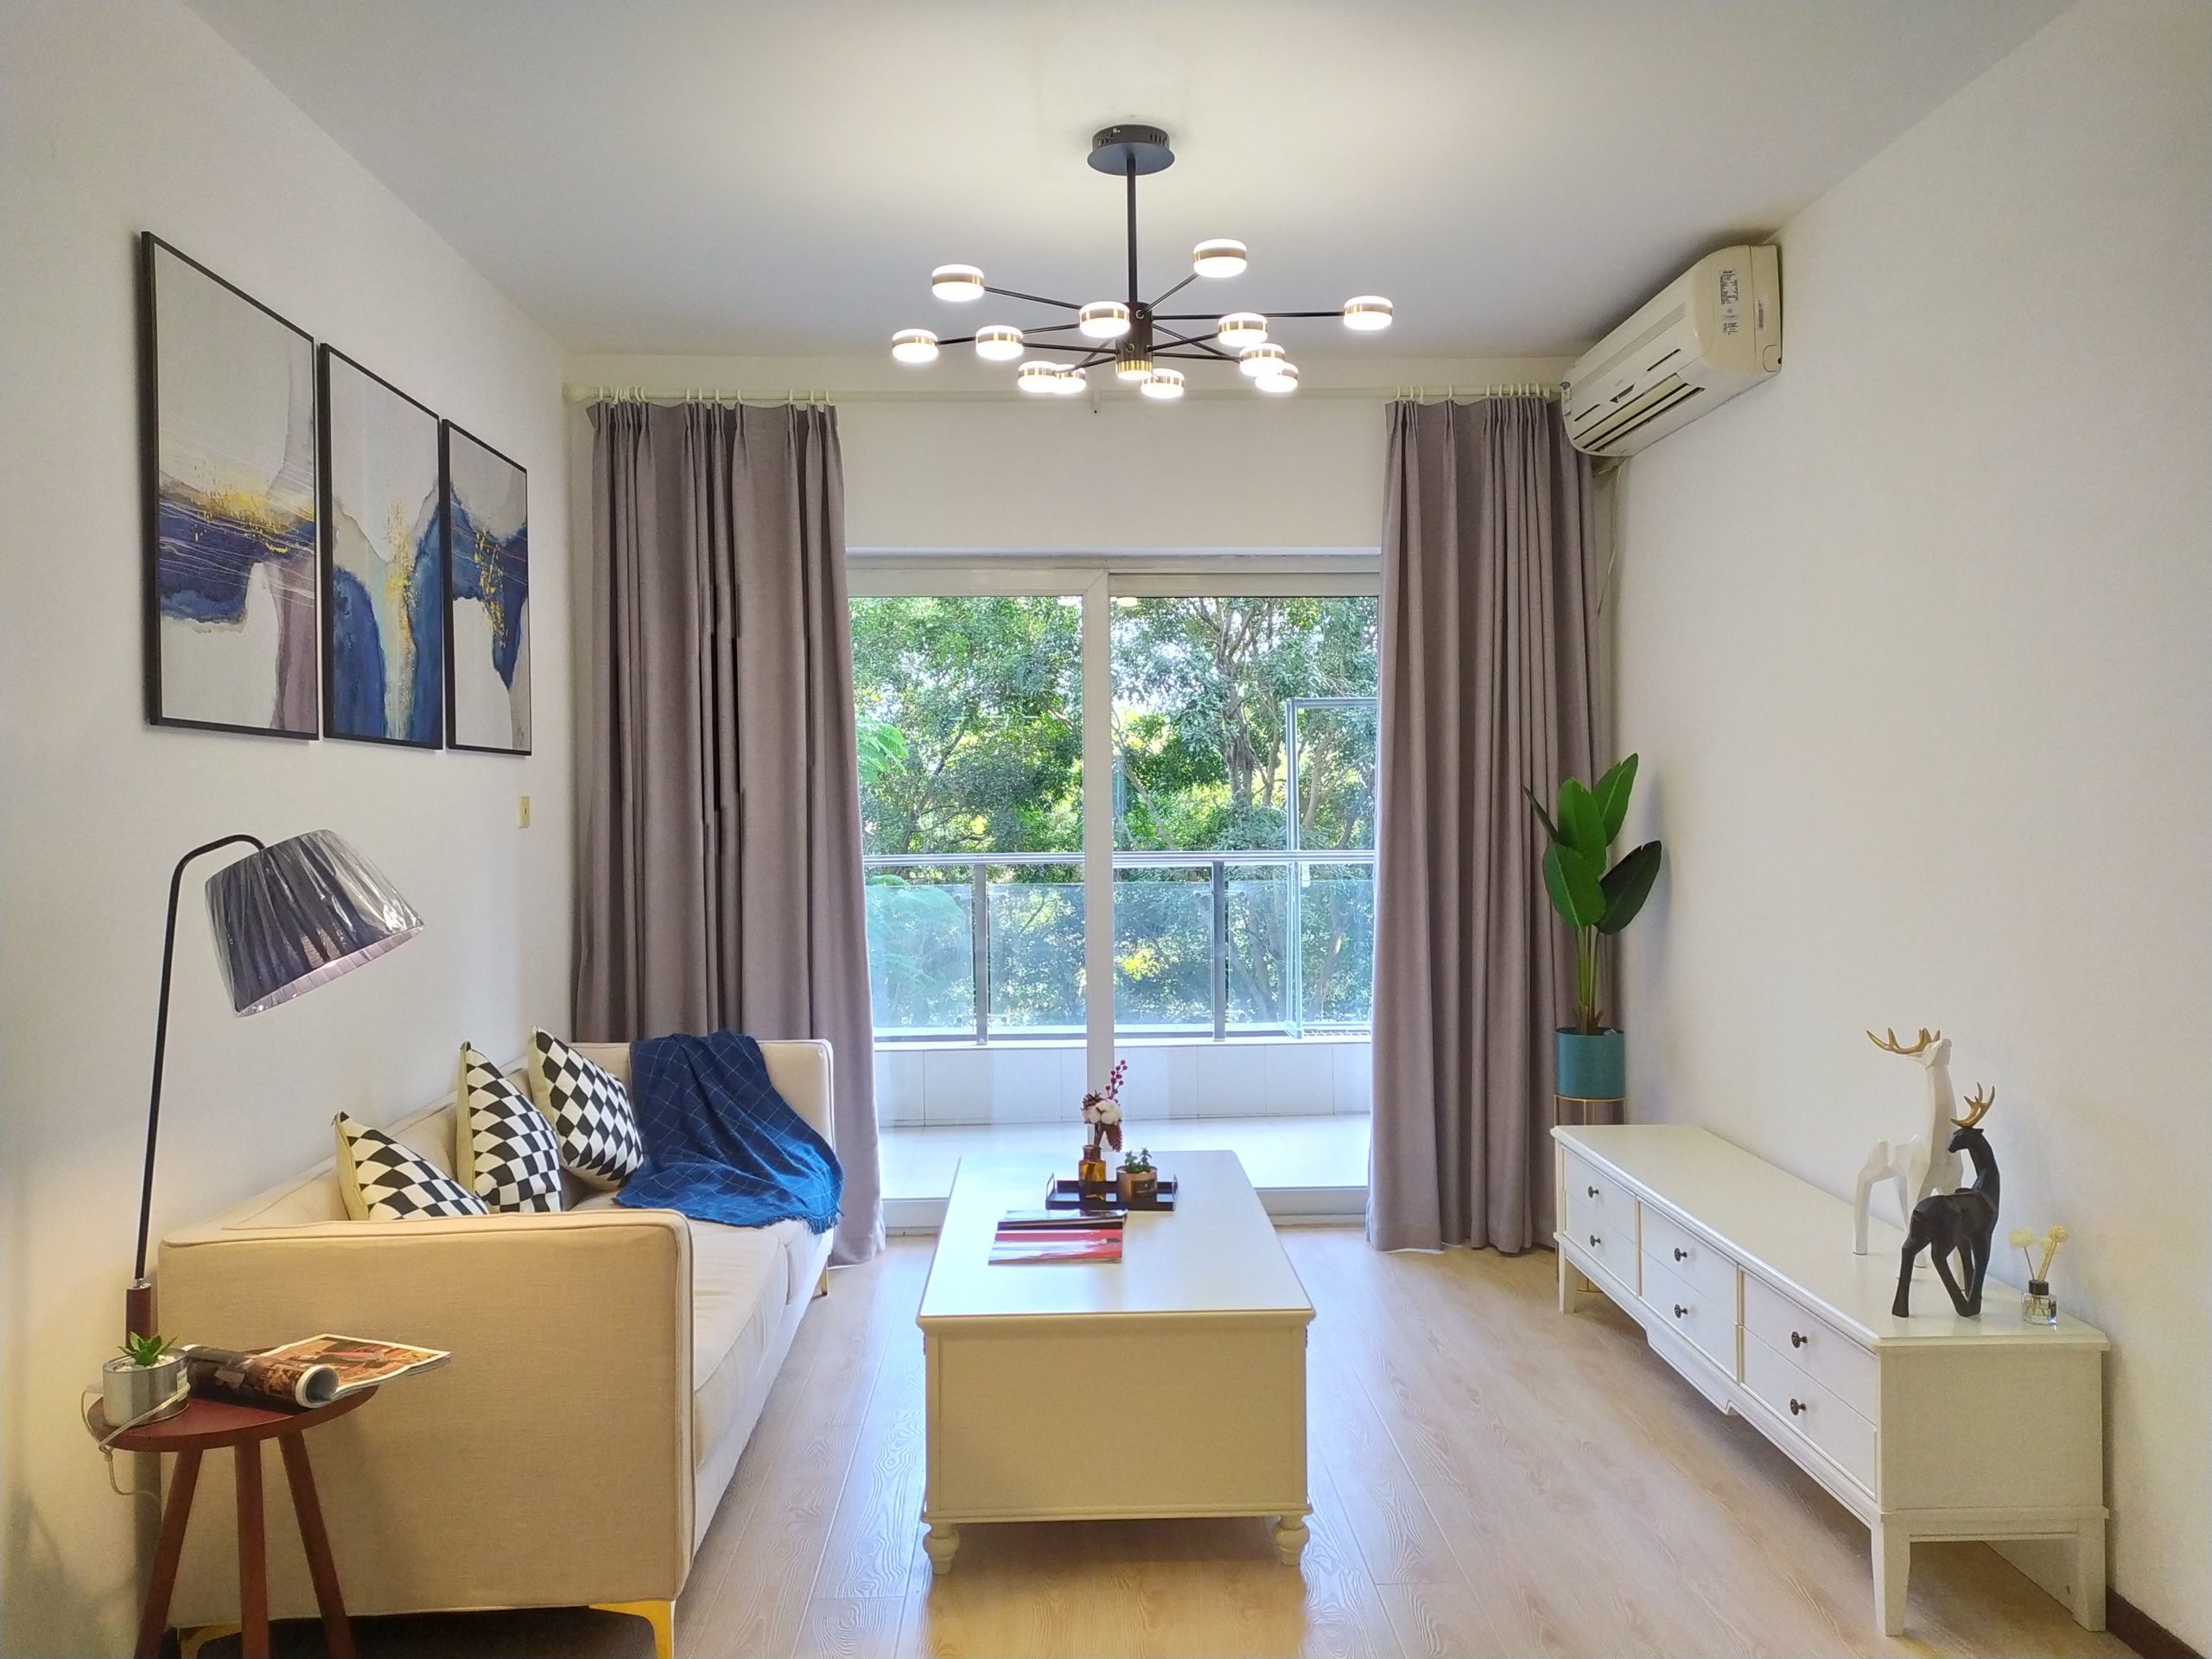 Featured image for “Nanshan | Shenzhen Bay area, lovely 85m² 2-bedroom apartment”